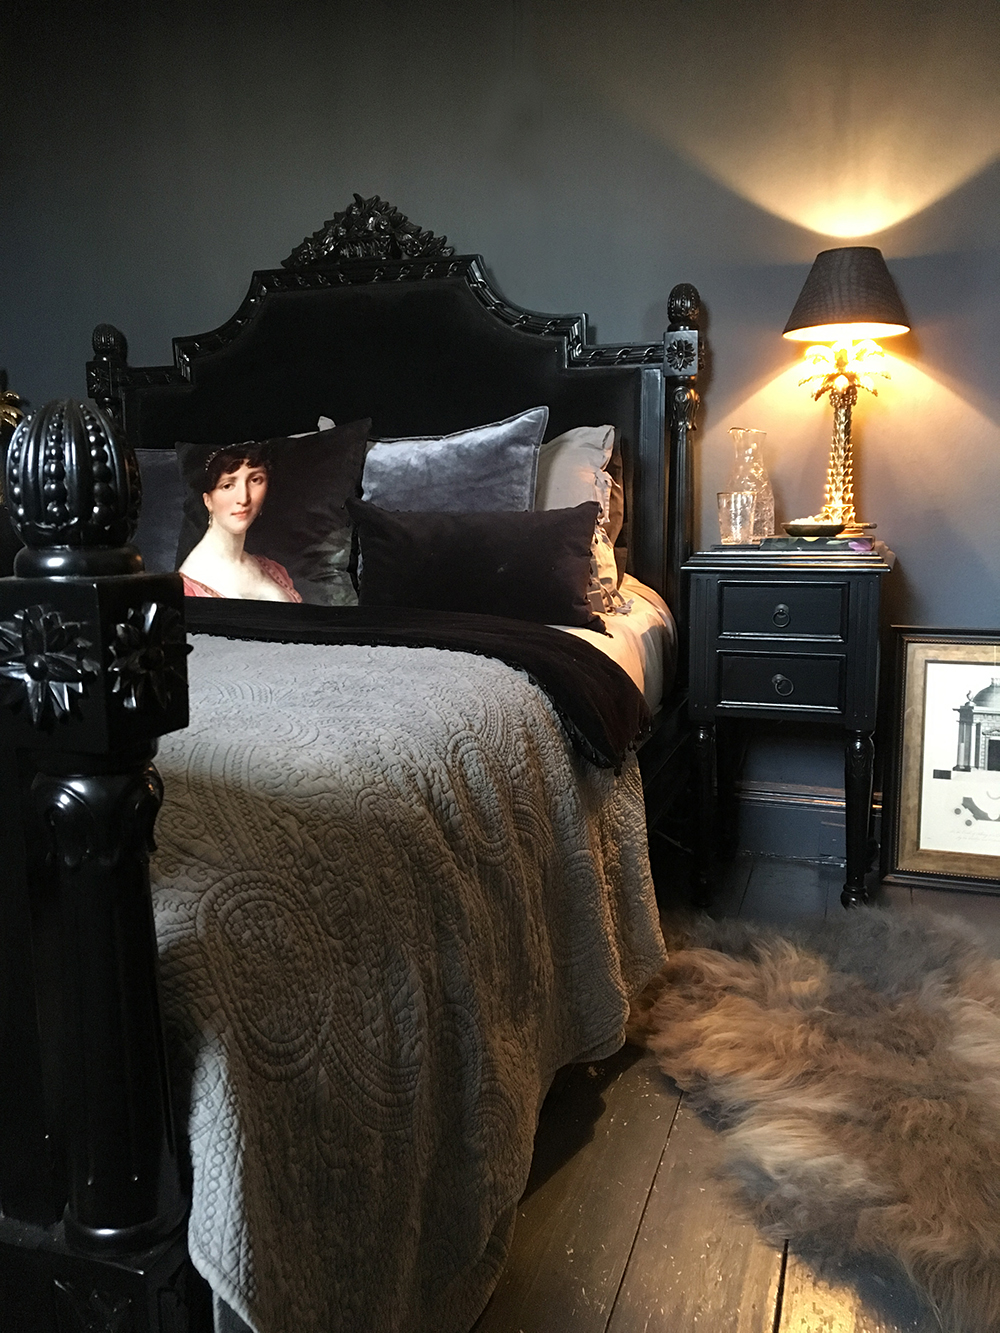 House Tour - Rachel Edmonds. Bedroom inspiration. Moody interiors. Dark, rich colours with gold accents